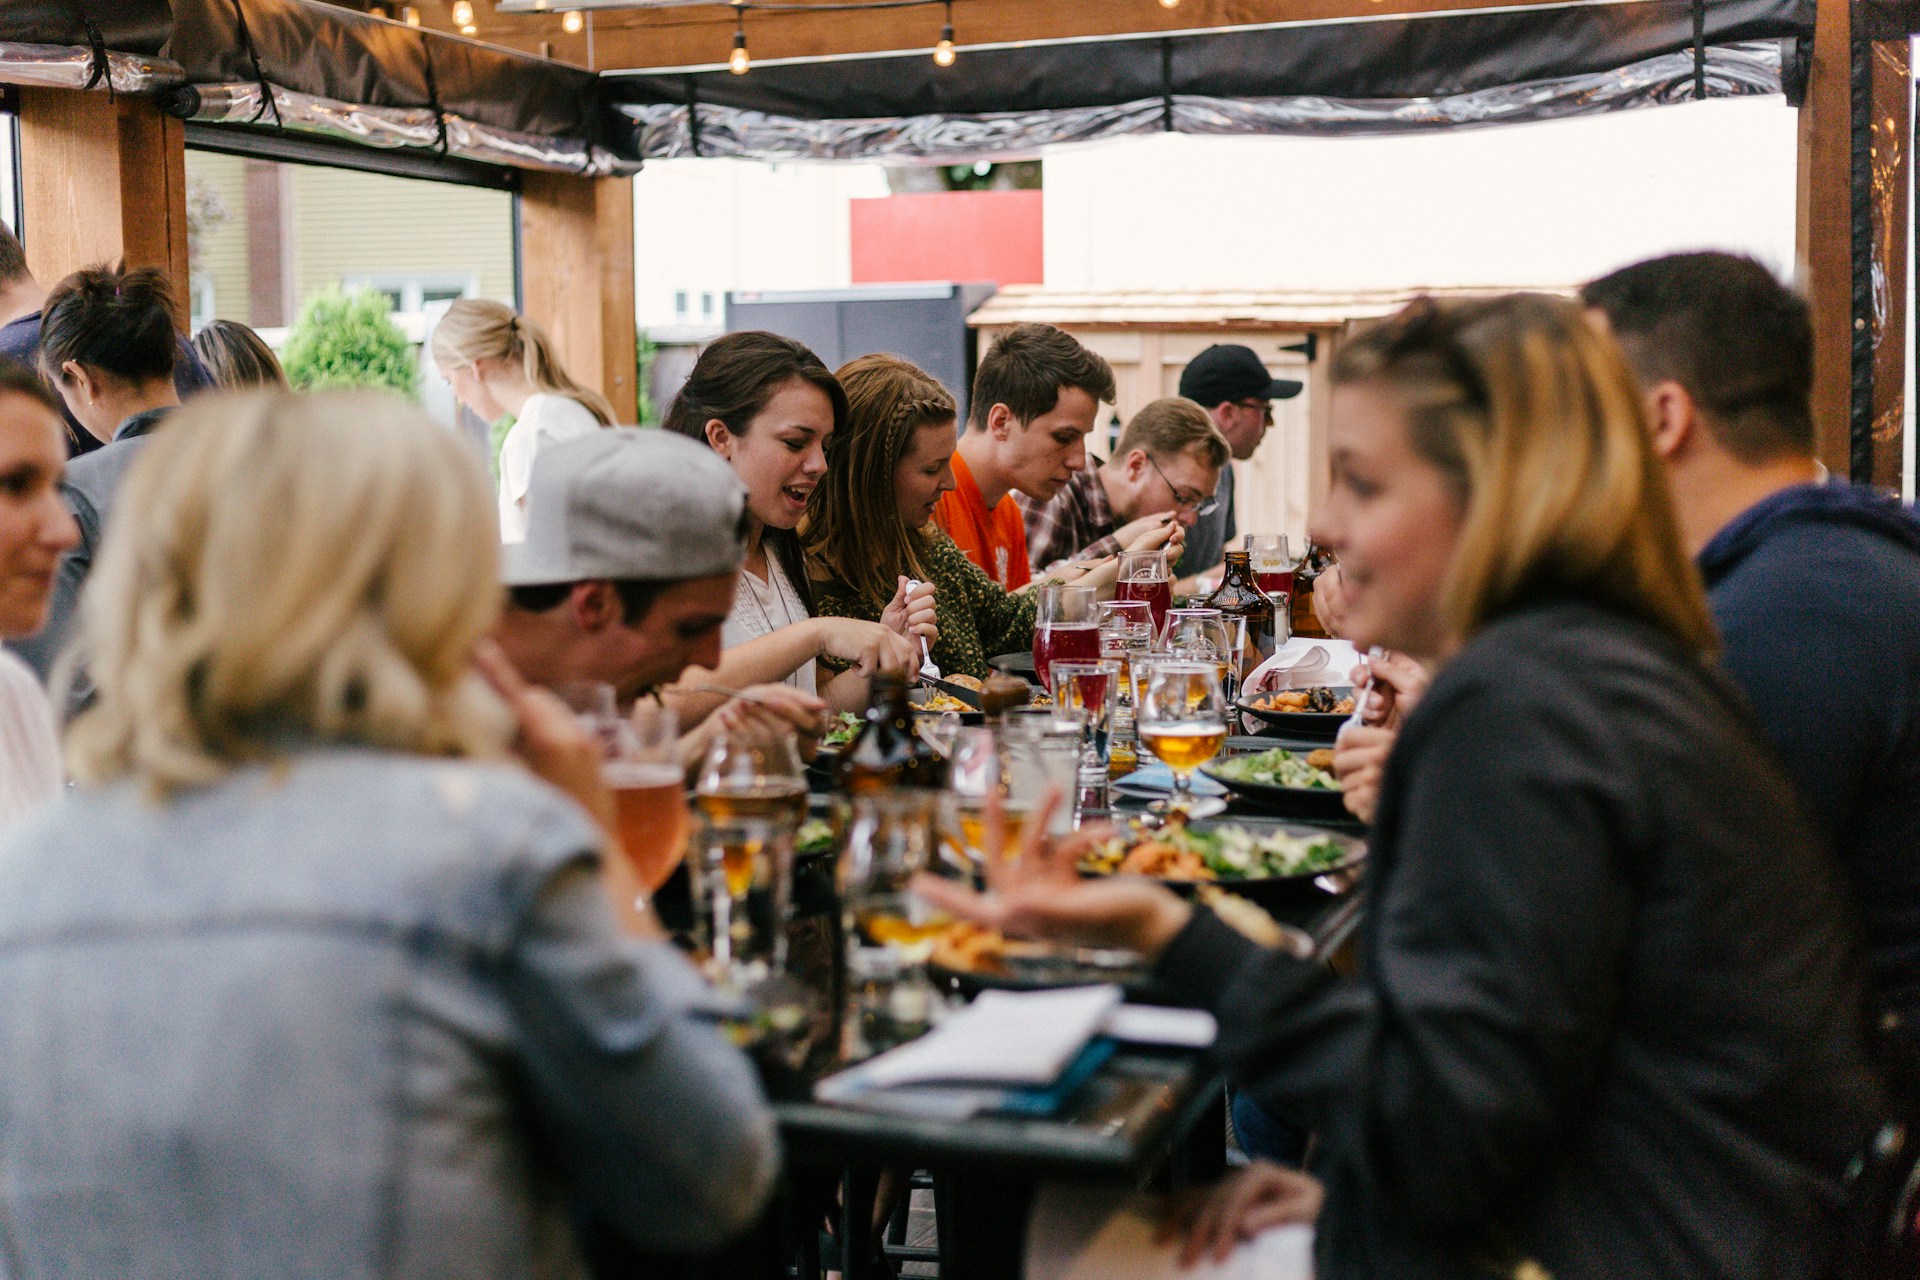 Image title: corporate events Image alt-title: people-sitting-in-front-of-table-talking-and-eating Image URL: https://unsplash.com/photos/people-sitting-in-front-of-table-talking-and-eating-W3SEyZODn8U 